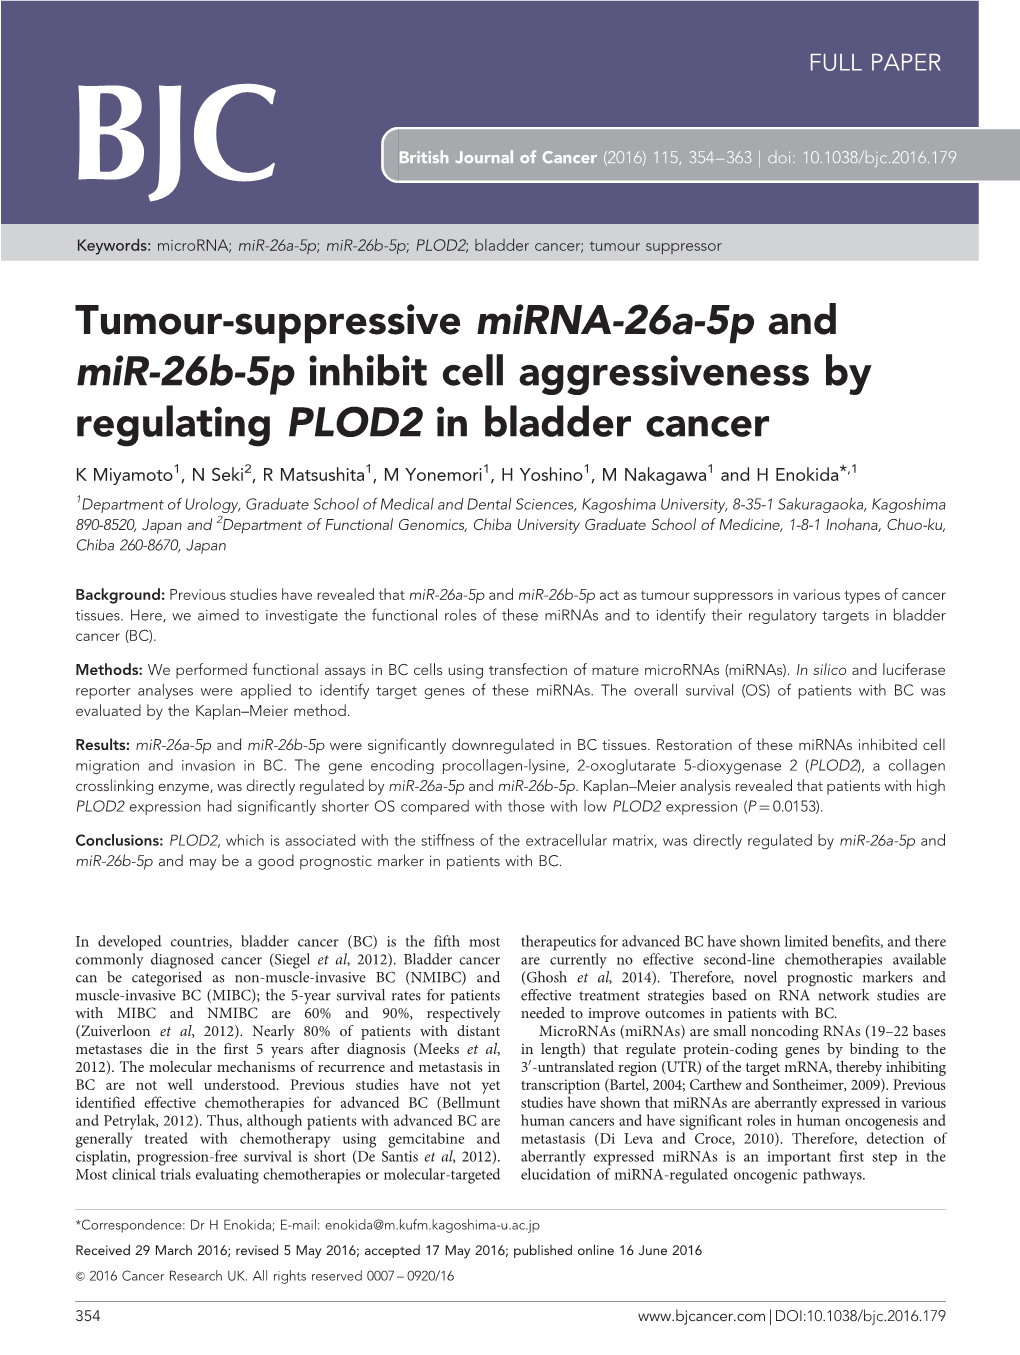 Tumour-Suppressive Mirna-26A-5P and Mir-26B-5P Inhibit Cell Aggressiveness by Regulating PLOD2 in Bladder Cancer